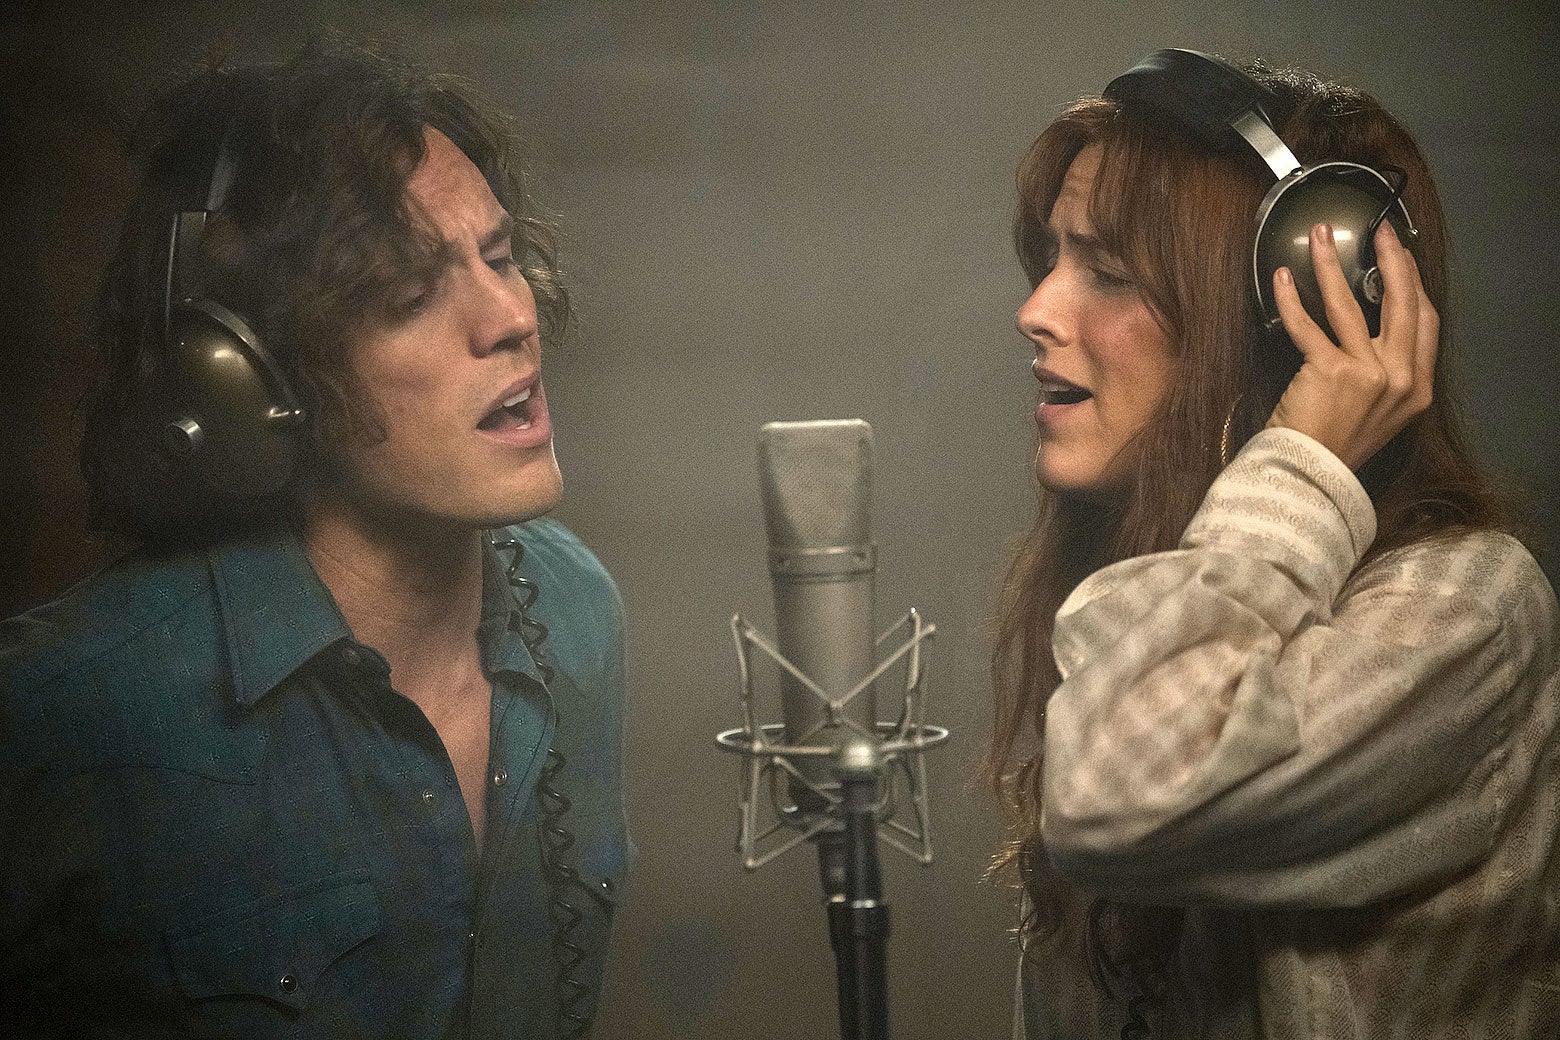 The two sing impassionedly and attractively in ’70s wardrobe into a studio microphone.